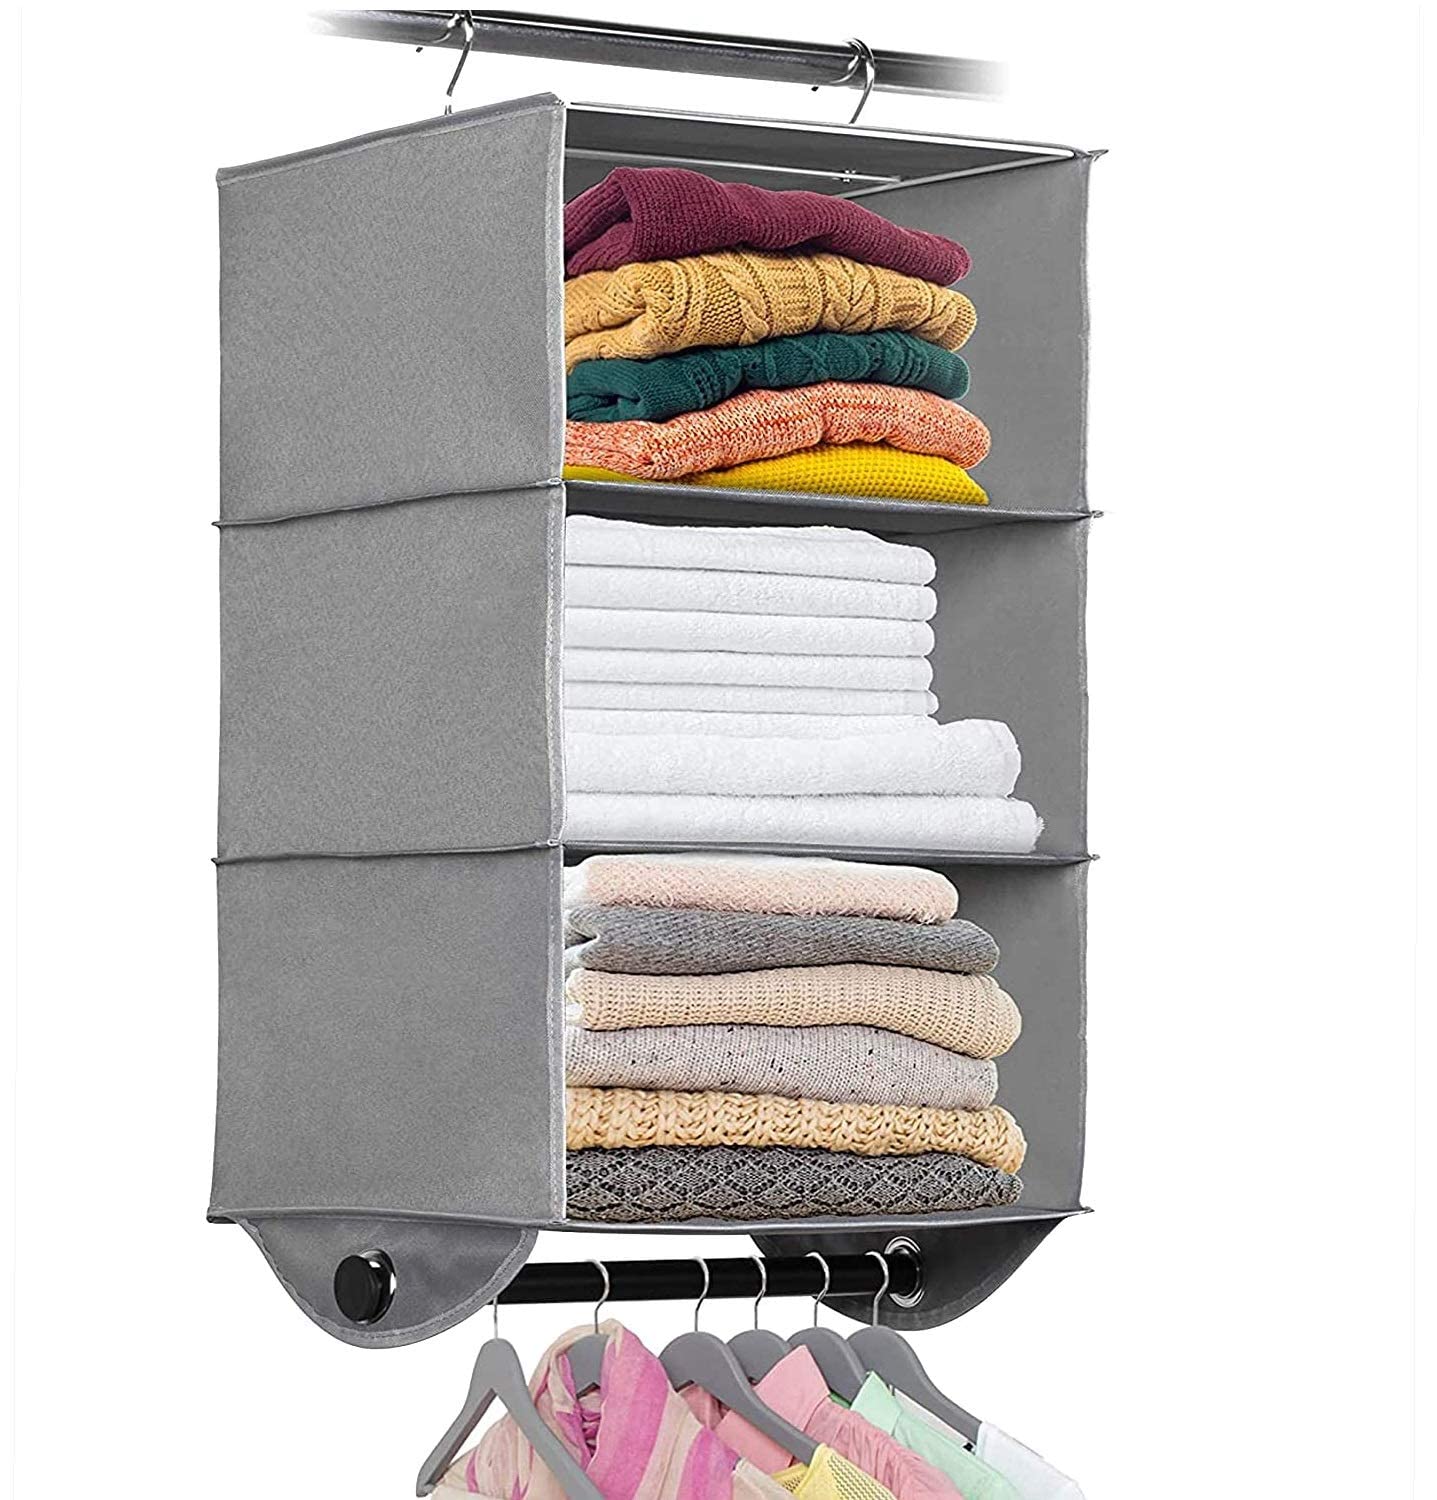 Hanging Closet Organizers with 3 Shelves - Closet Storage and RV Closet Organizer - Grey with Black Metal Rod - 12� W x 12� D x 29-1/2� H - Perfect for College Dorms  - Very Good